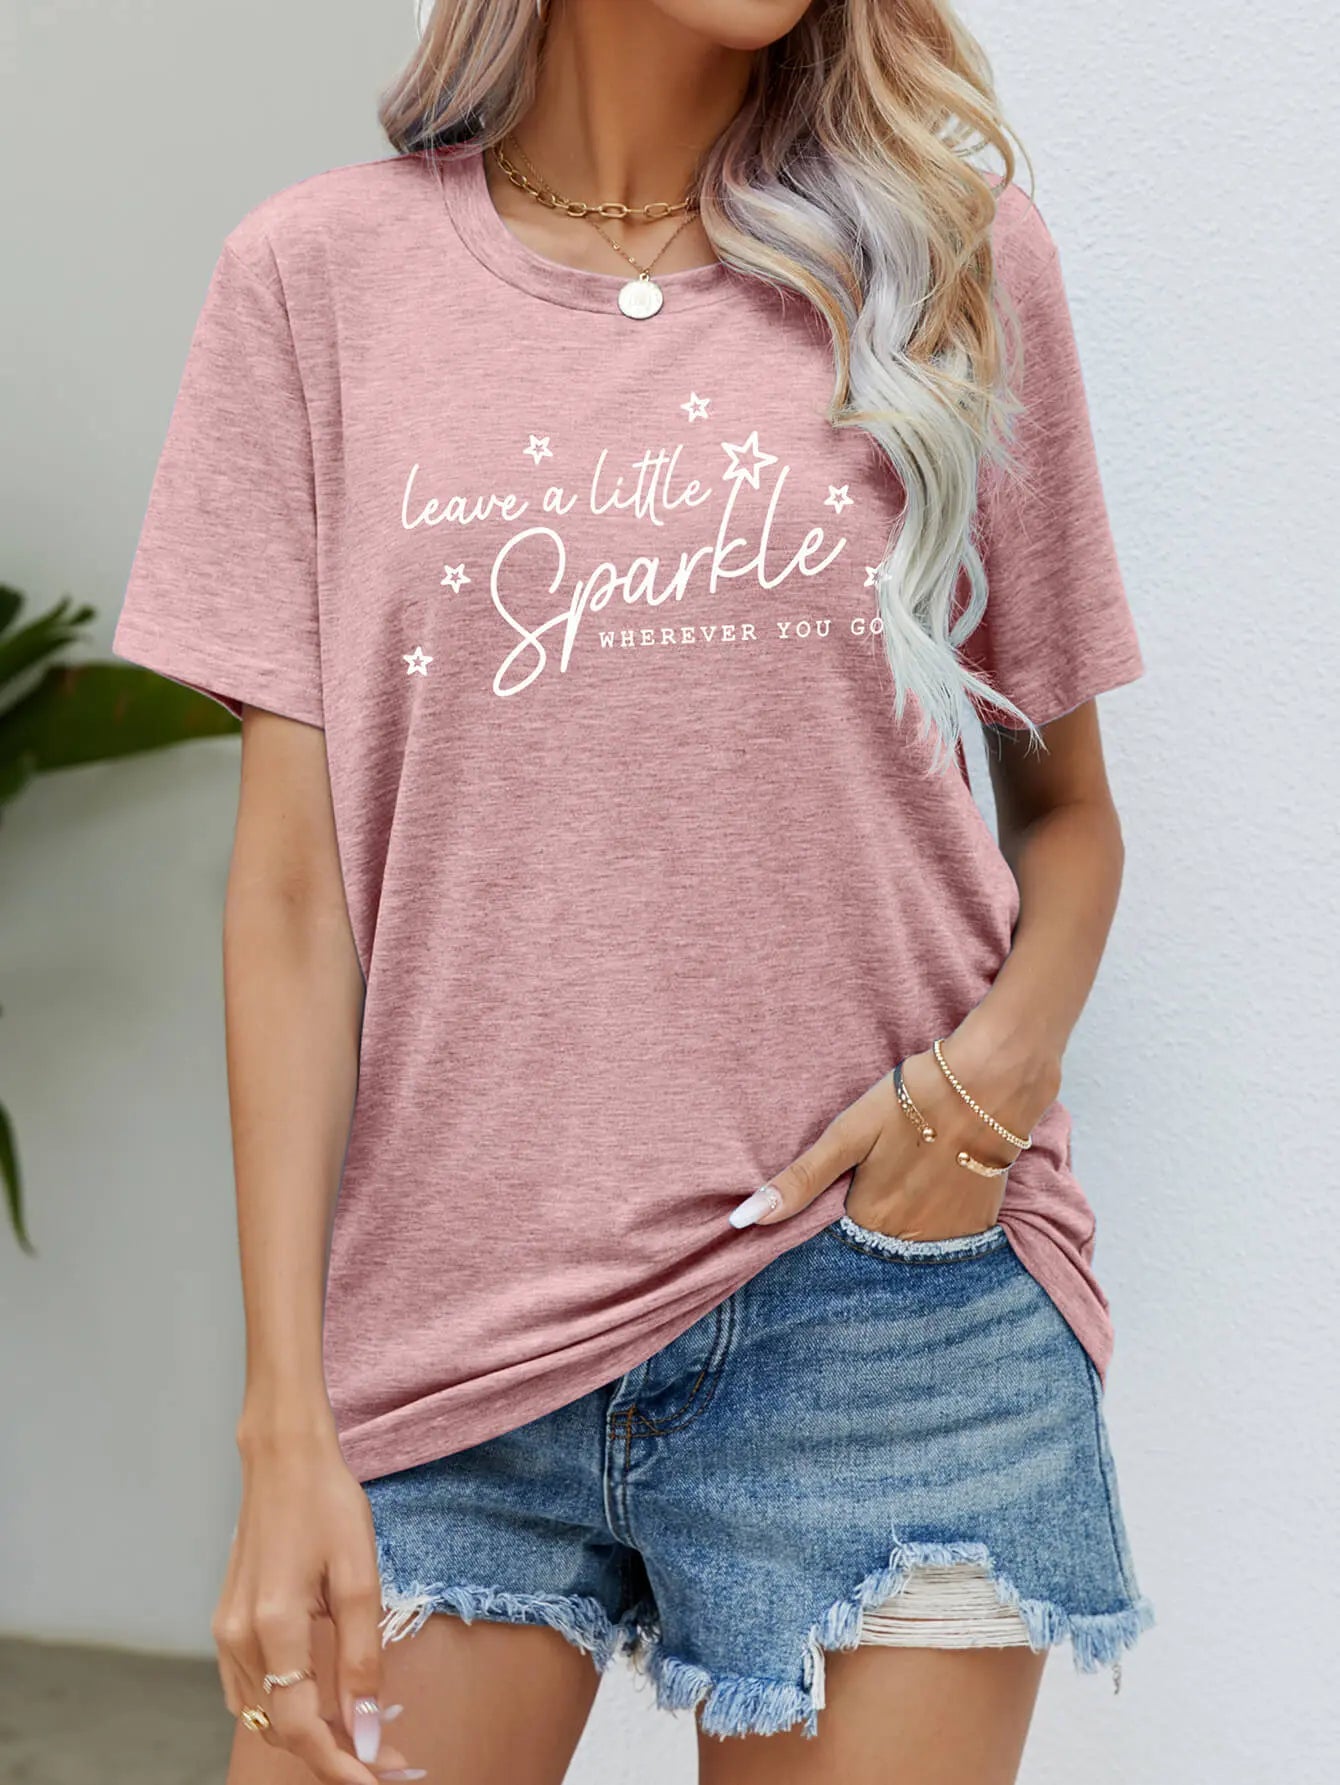 LEAVE A LITTLE SPARKLE WHEREVER YOU GO Tee Shirt - Image #13